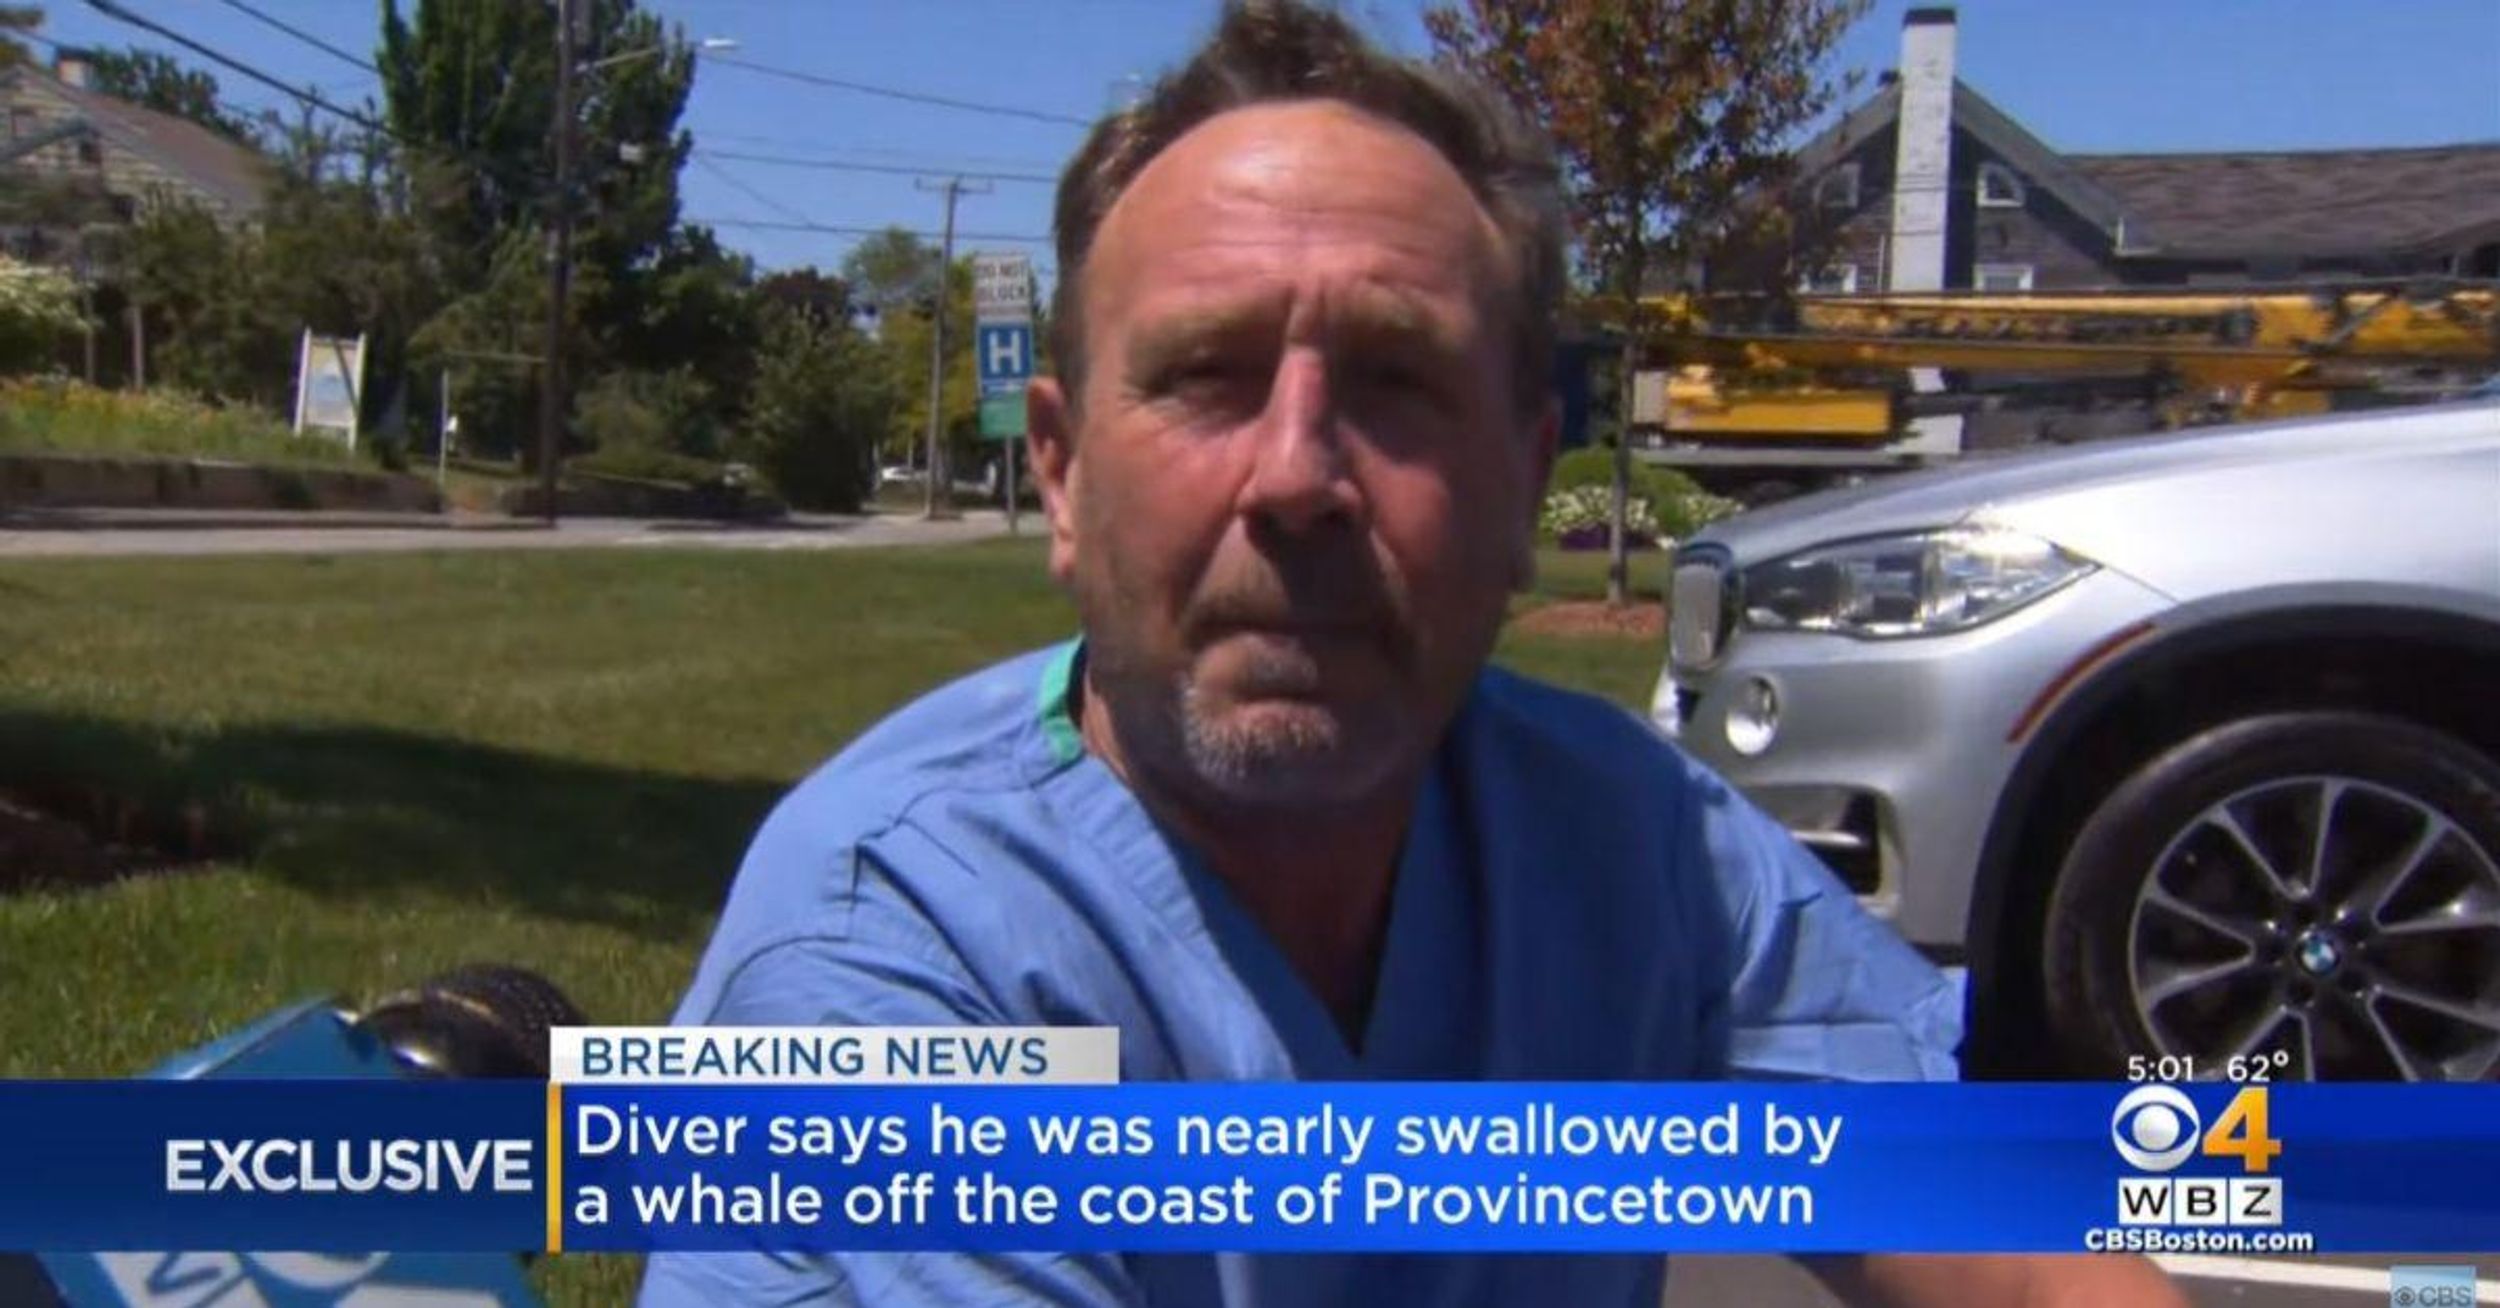 Lobster Fisherman Narrowly Escapes After A Humpback Whale Nearly Swallowed Him